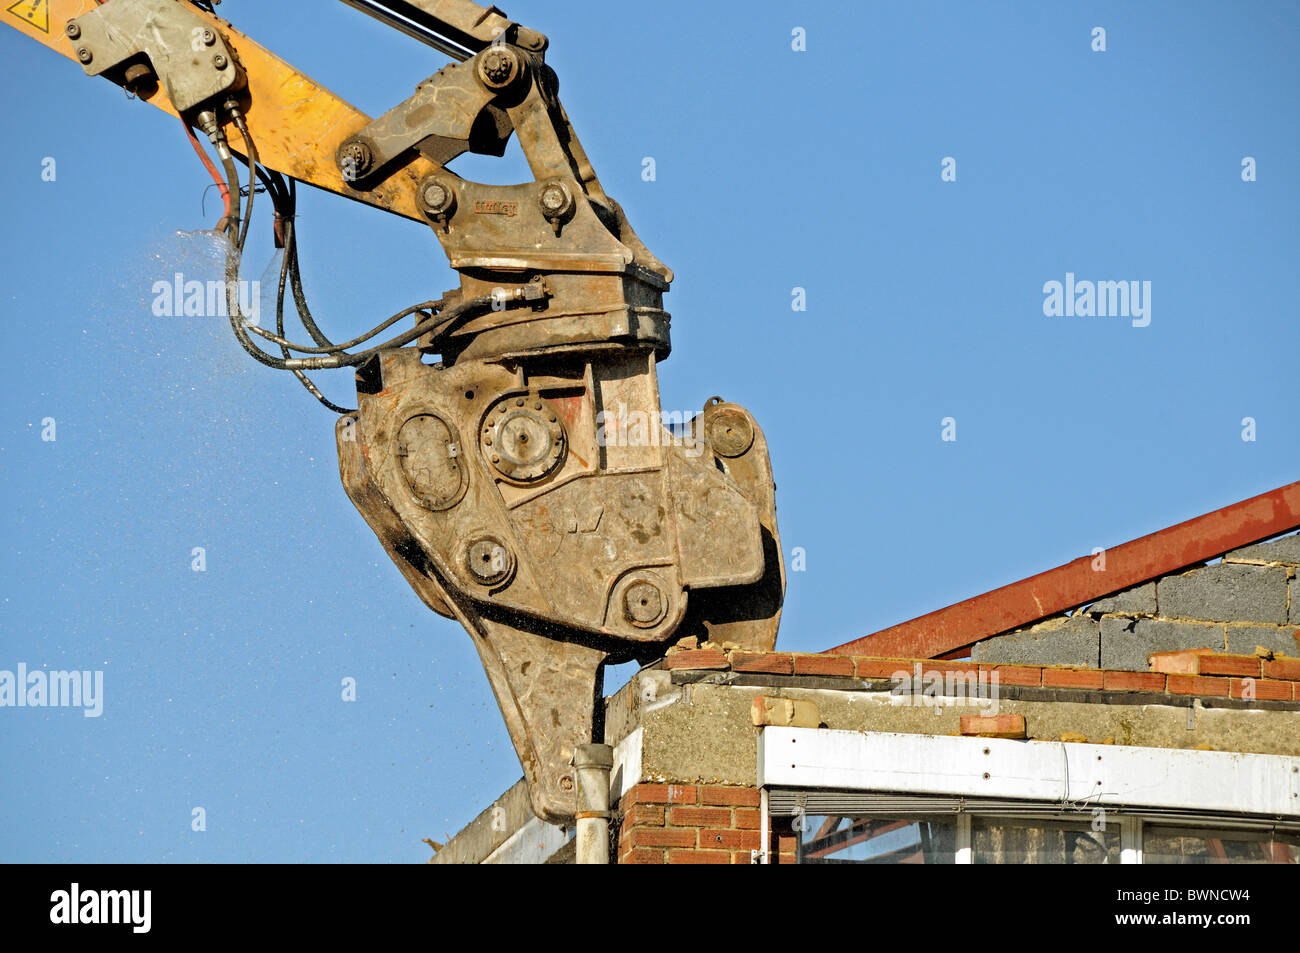 Close up of Pulveriser, a demolition tool on the arm of an excavator demolishing a building against sky Stock Photo